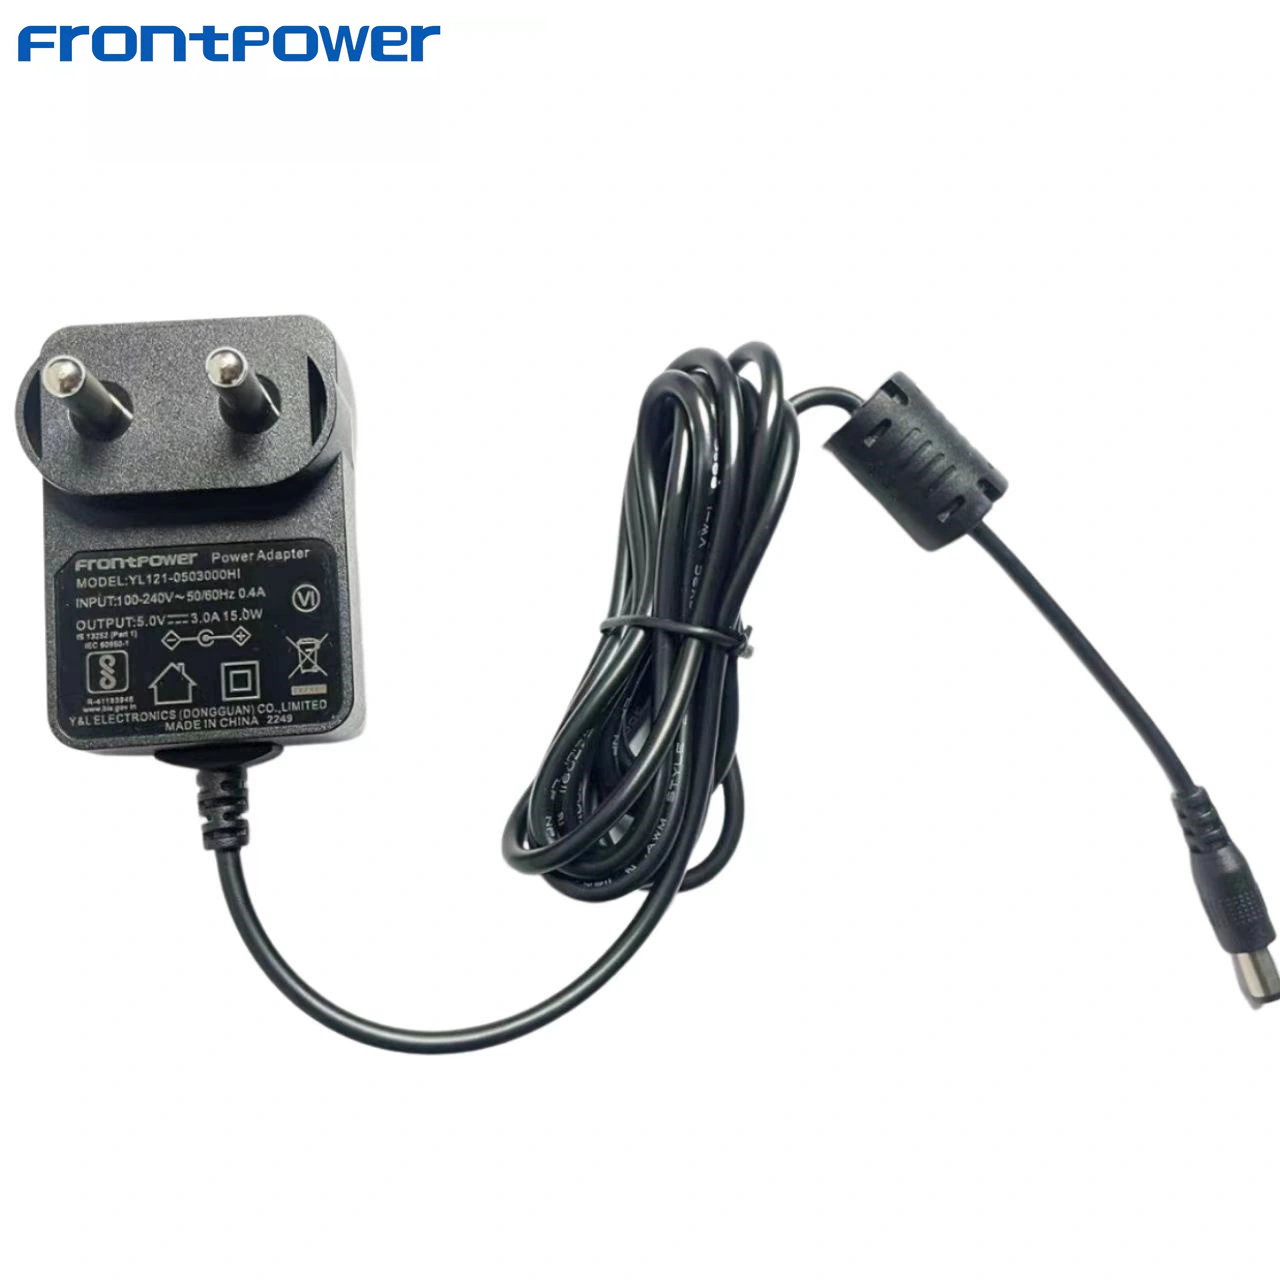 India adapter wall plug 5v charger switching 5V 3A 5V 2.5A 5V 2.4A 5V1A adapter for robot with BIS approval